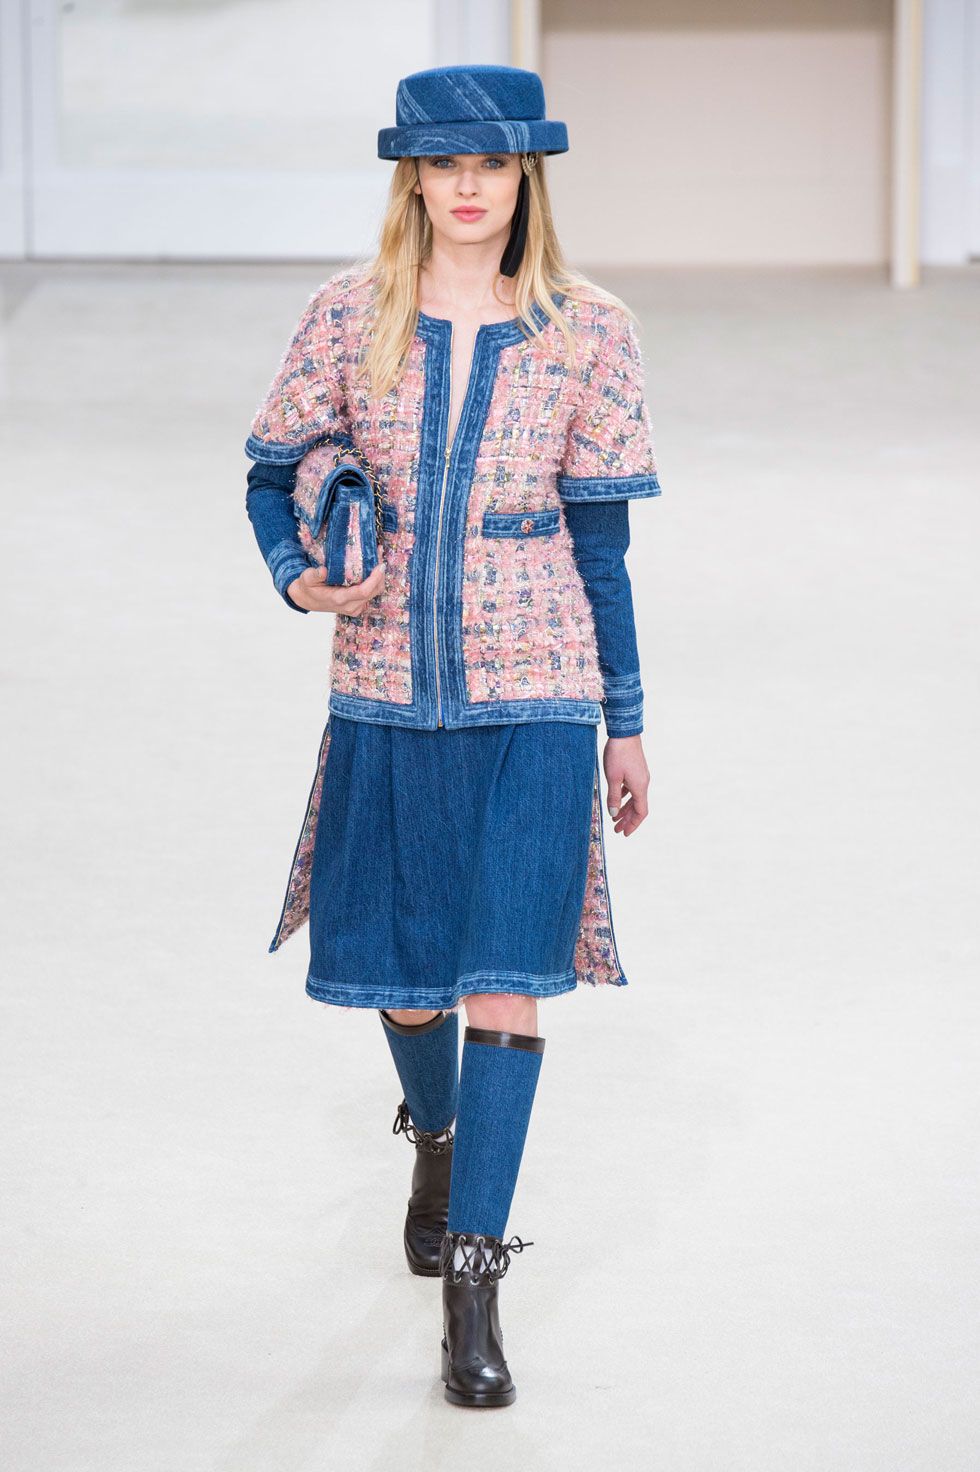 All the Looks From the Chanel Fall 2016 Ready-to-Wear Show